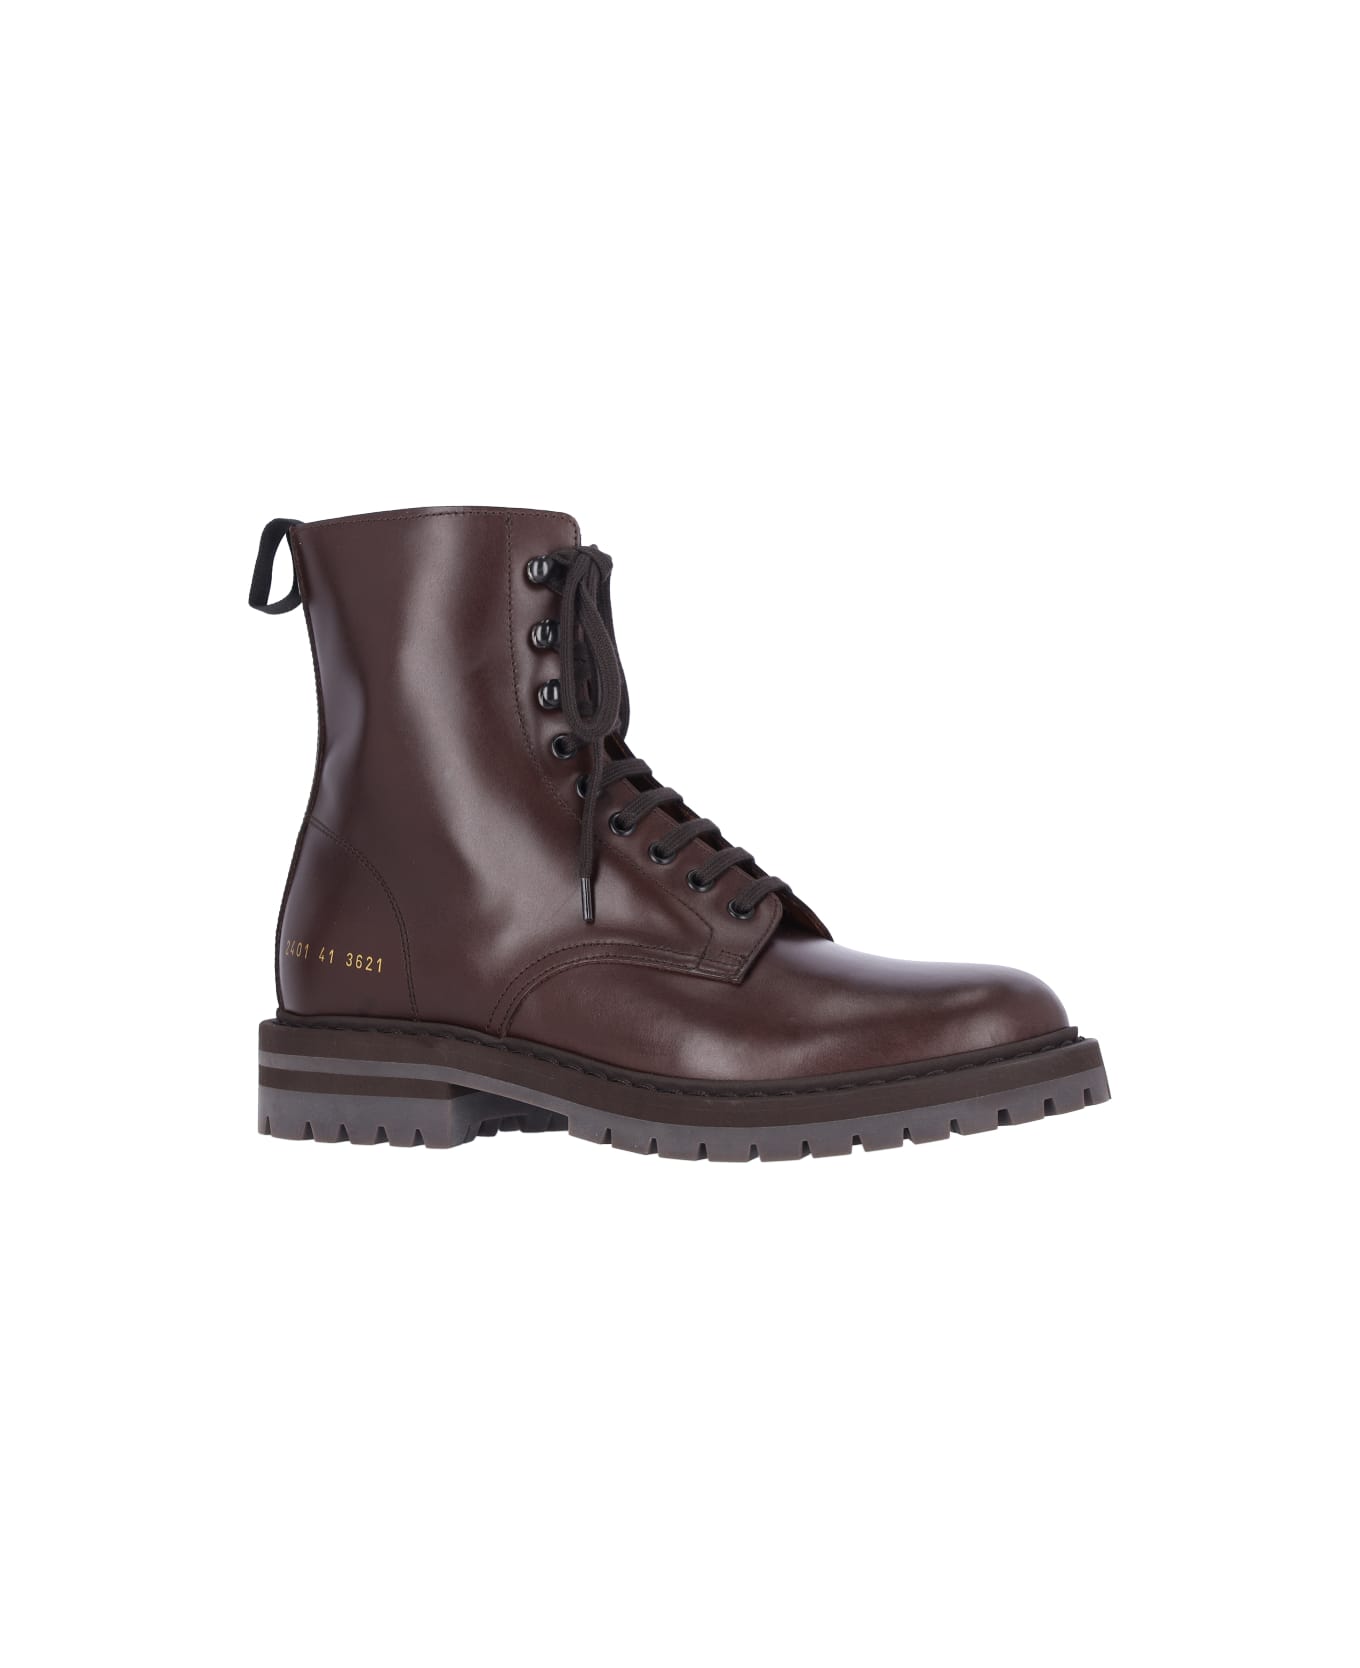 Common Projects Leather Derby Boots - Brown ブーツ